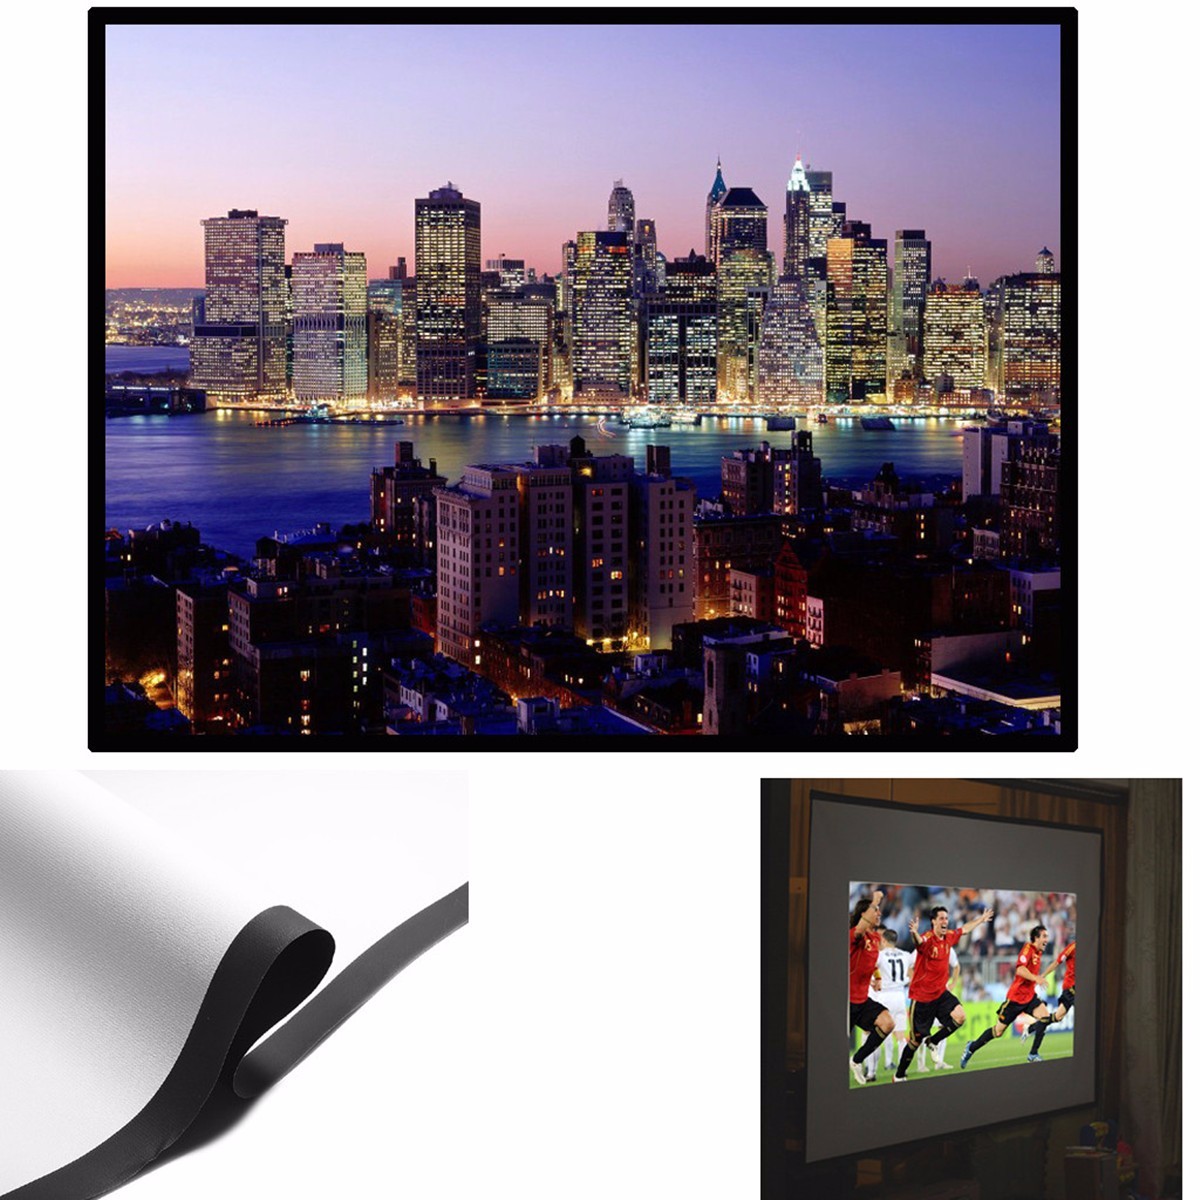 LEORY-100-Inch-169-White-Portable-Fold-Fabric-Projection-Screen-for-Home-HD-Projector-1676577-7